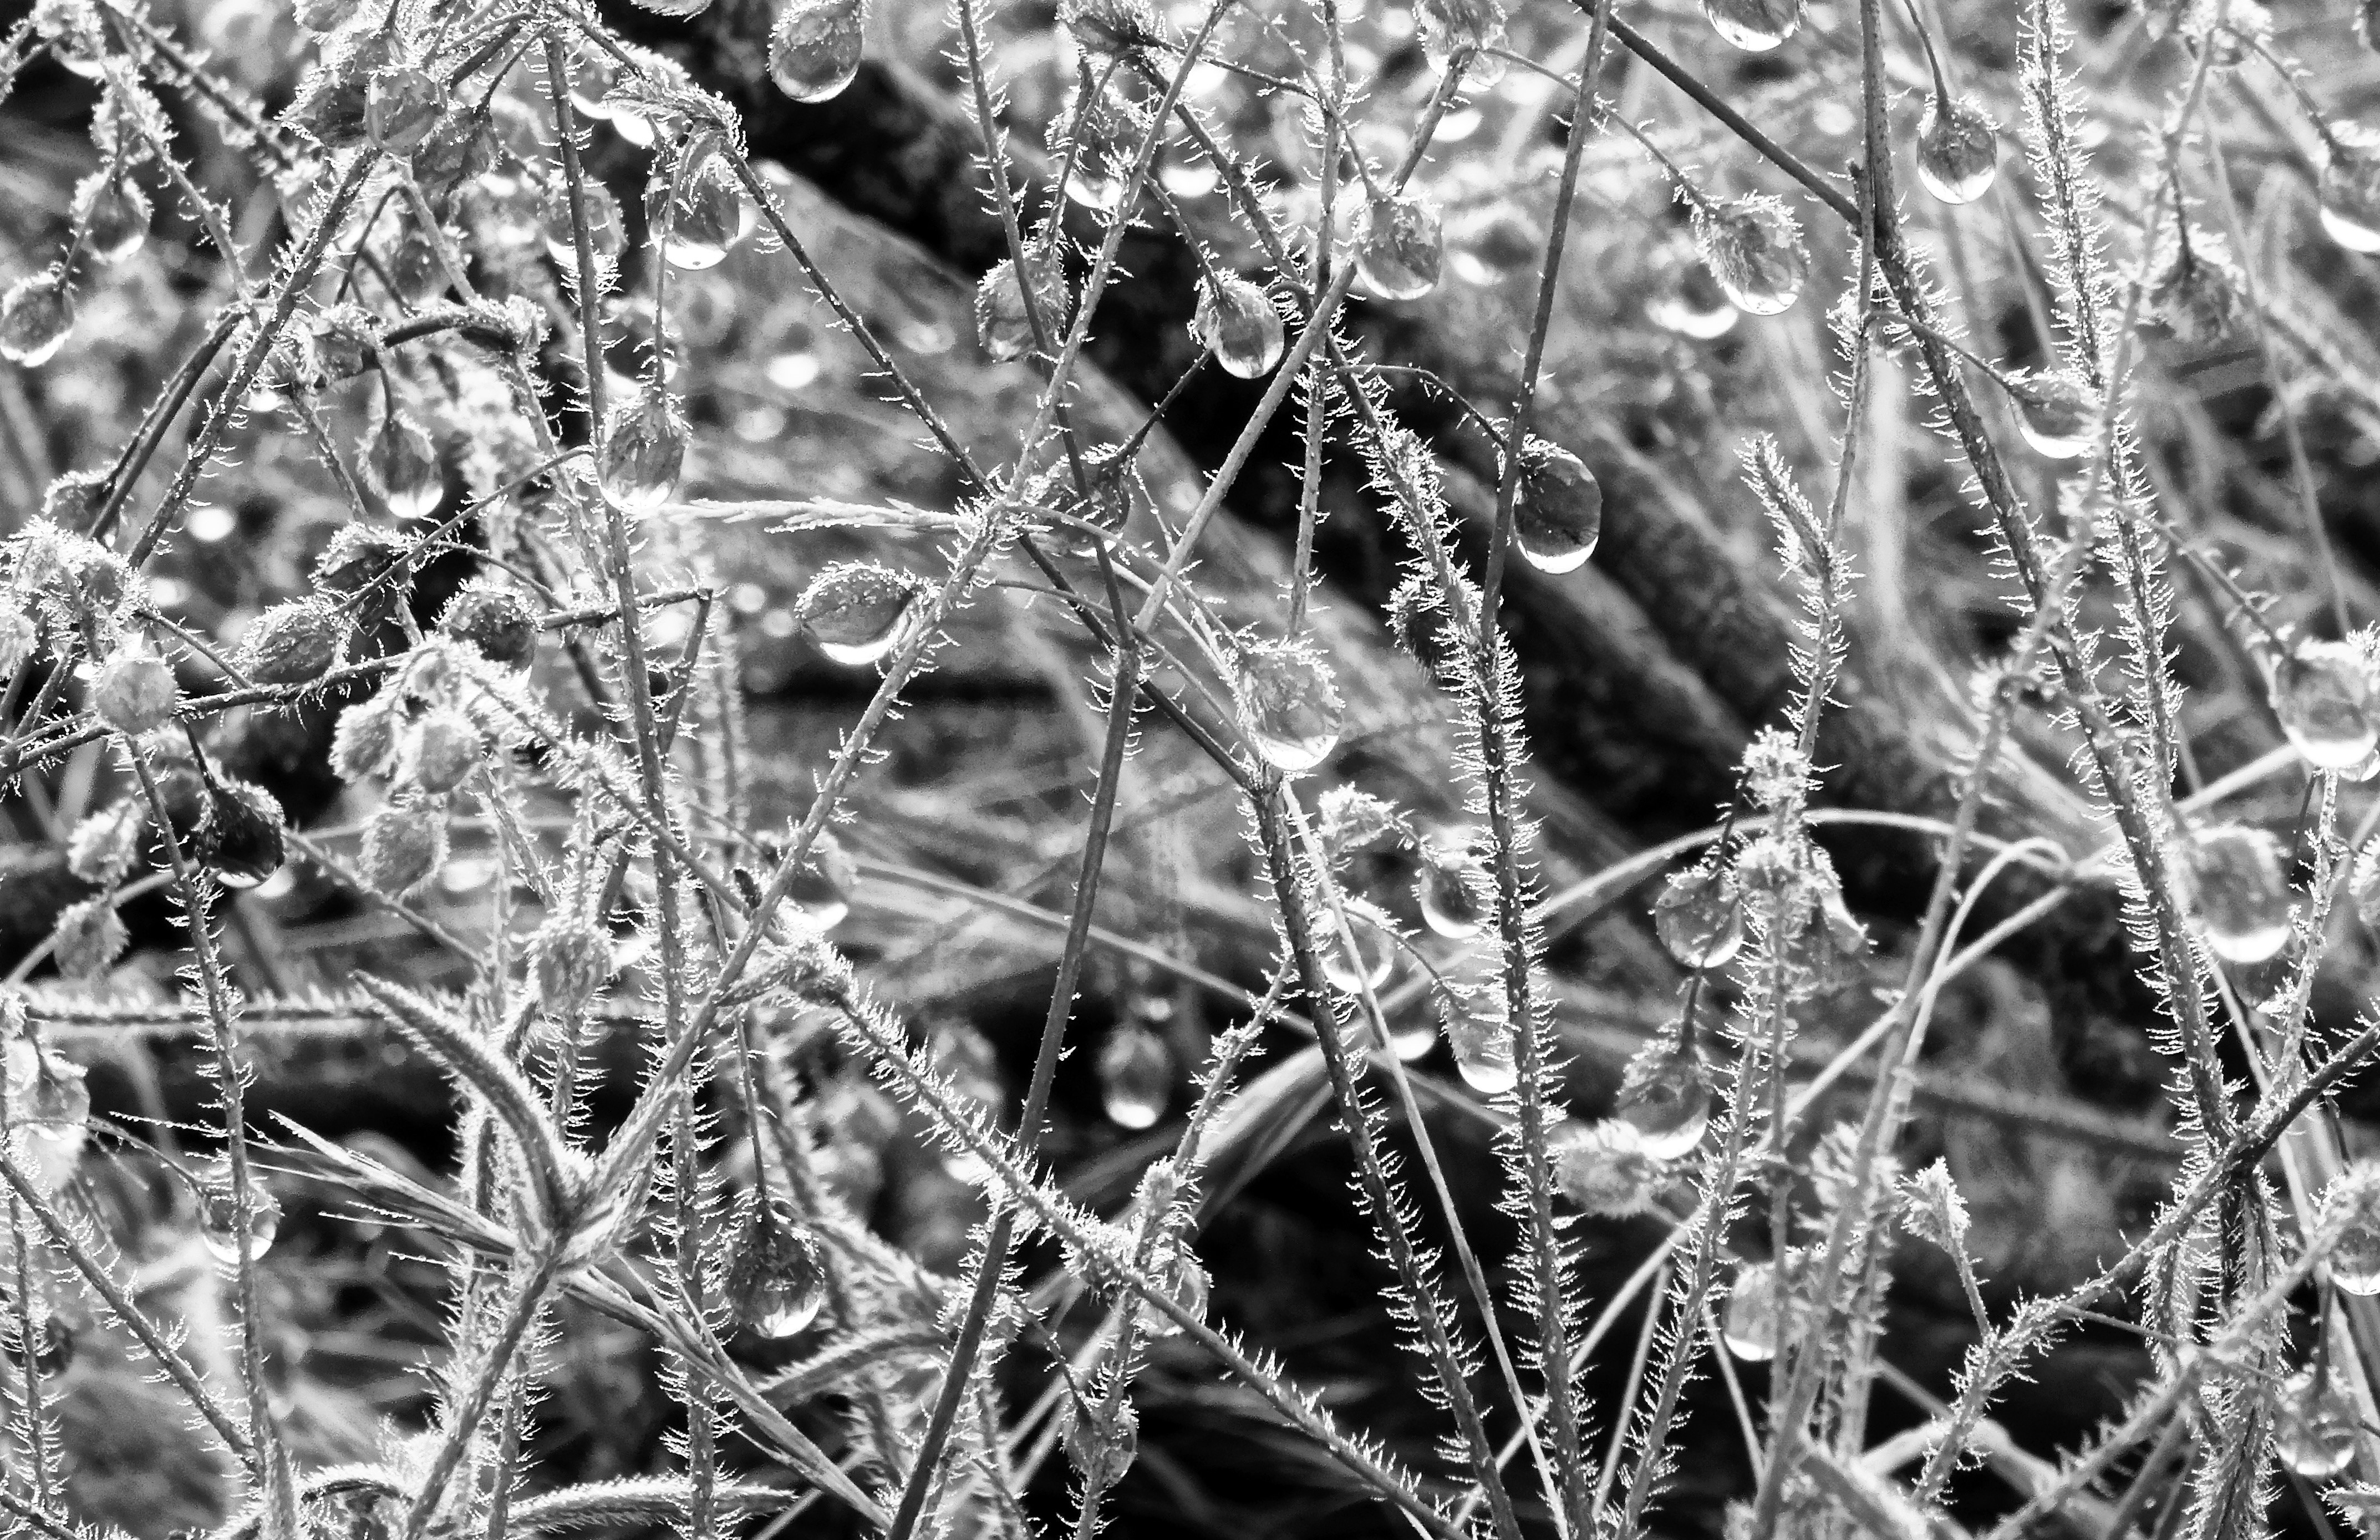 grayscale photo of droplets on plant stems